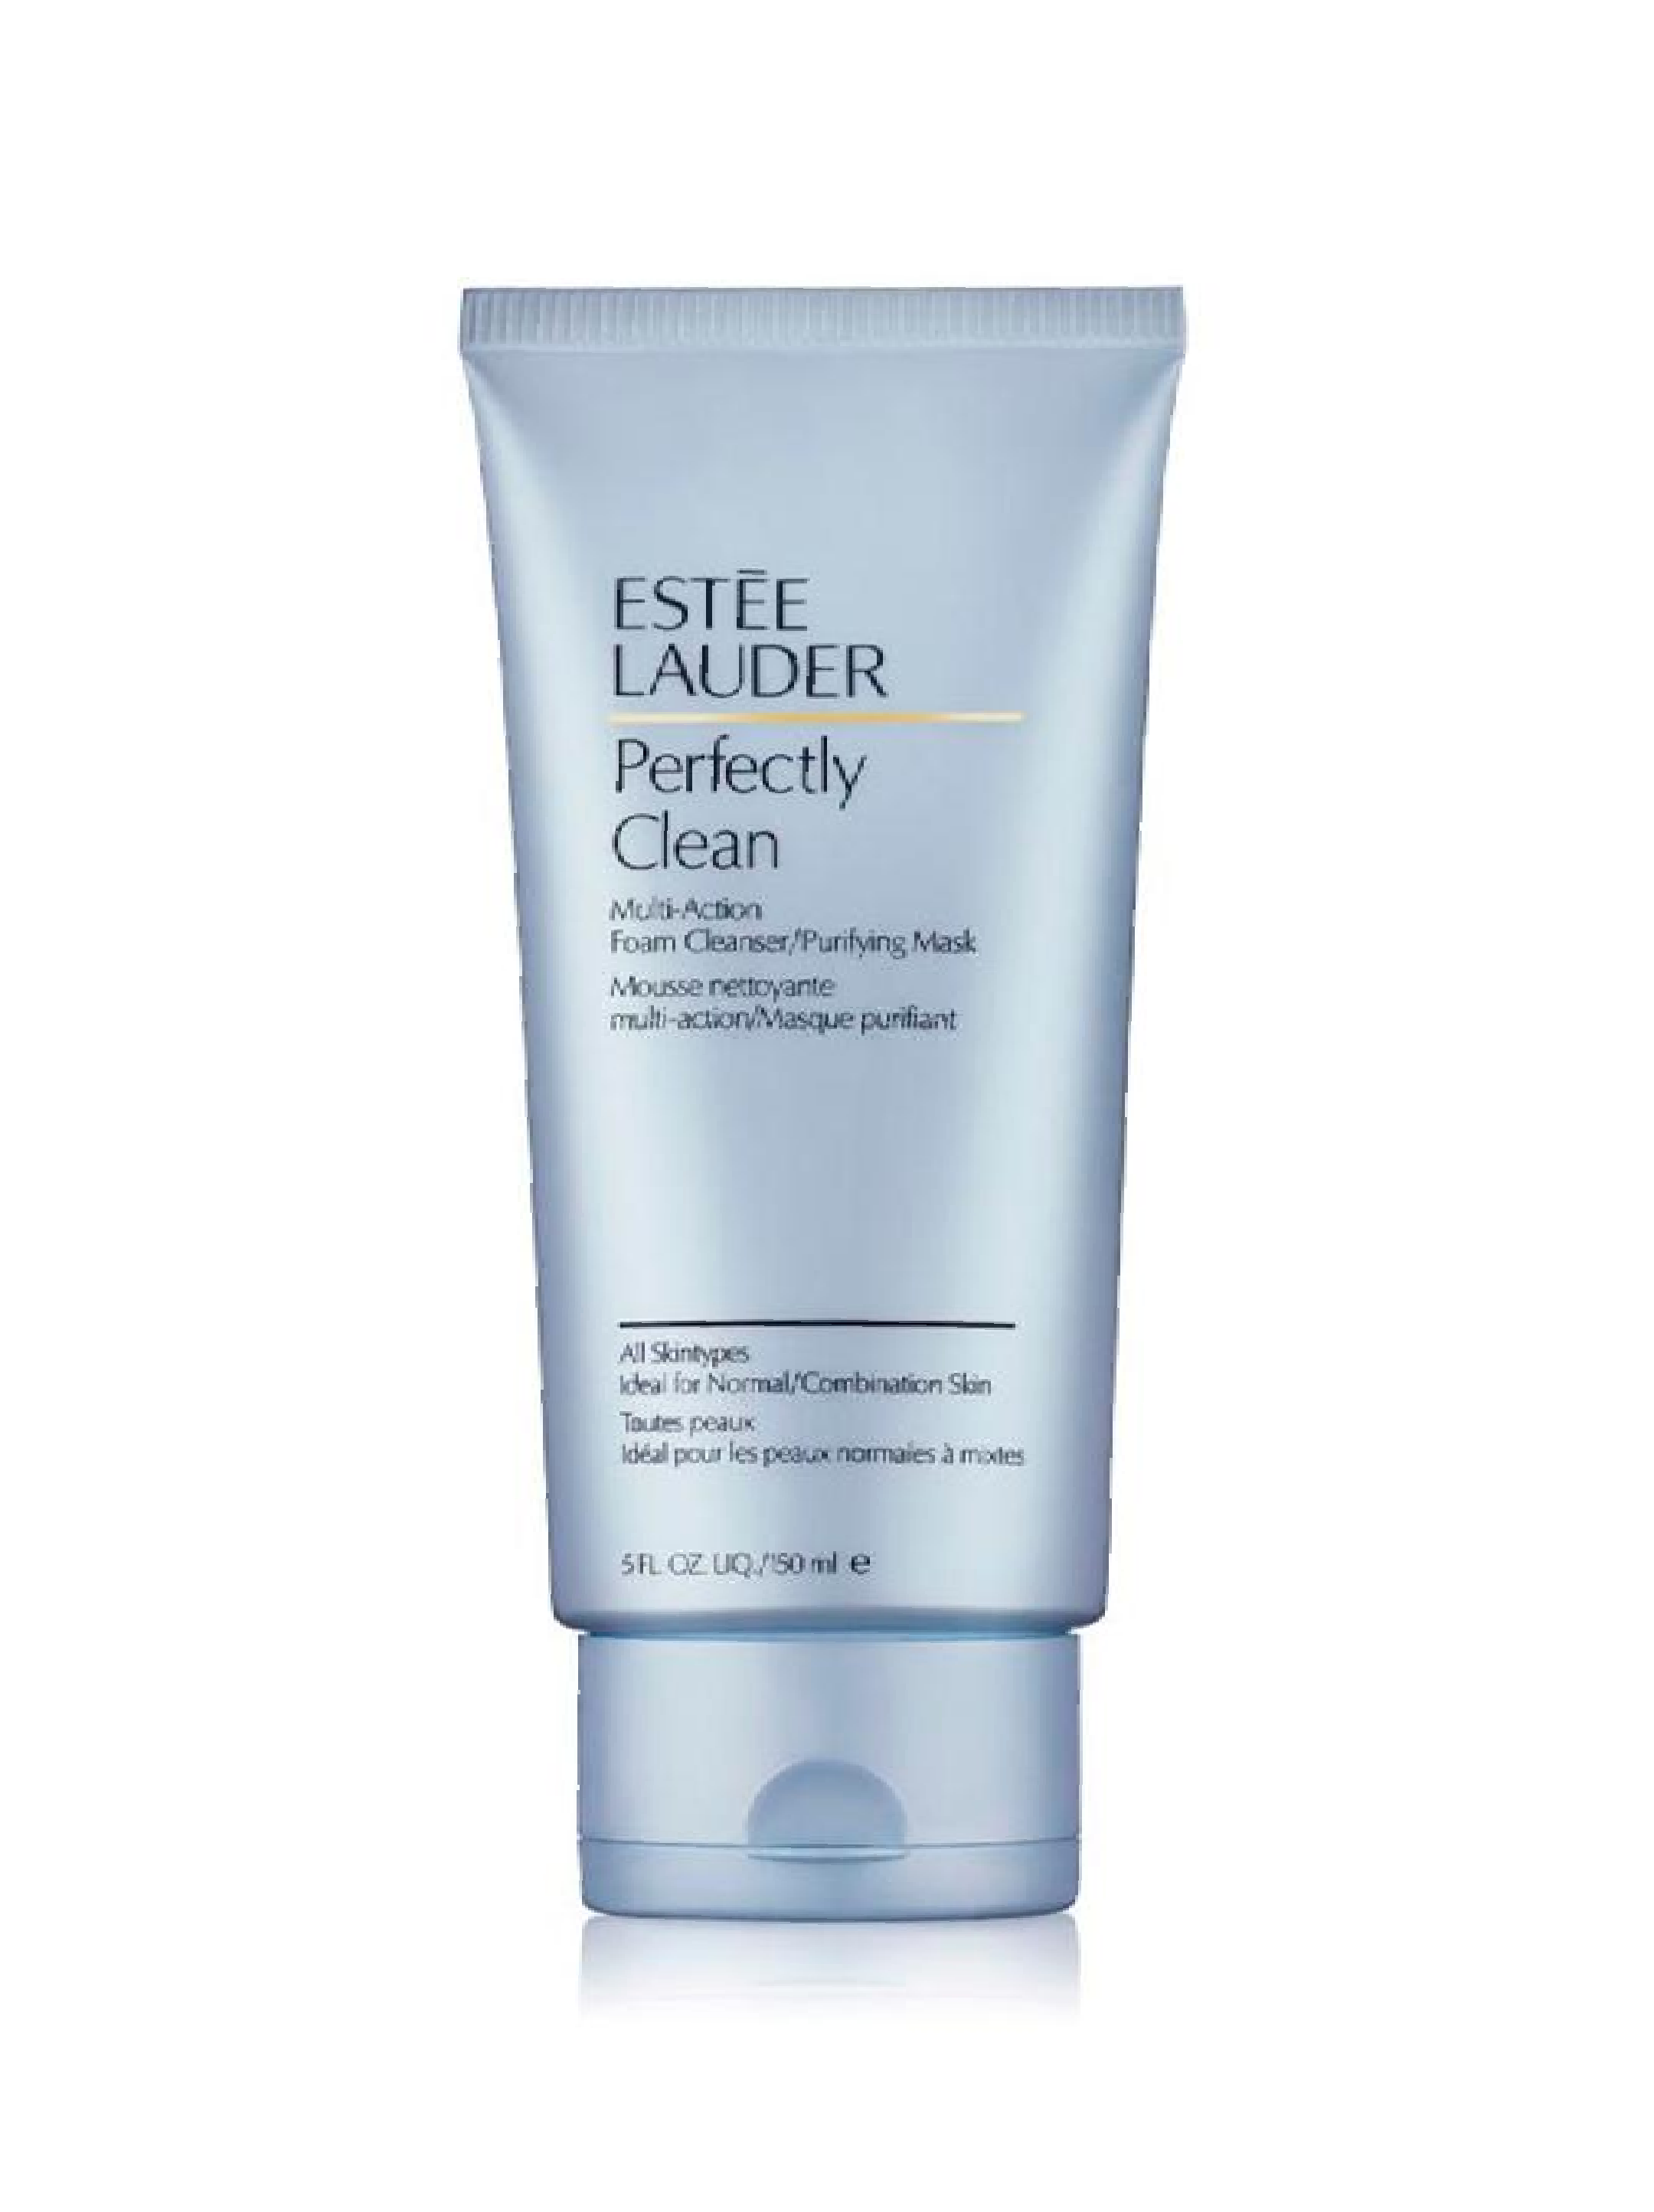 Multi cleansing. Estee Lauder perfectly clean Multi-Action Foam Cleanser/Purifying Mask. Estee Lauder perfectly clean Multi-Action. Multi Action Foam Cleanser Эсте лаудер. Умывалка Estee Lauder perfectly clean.